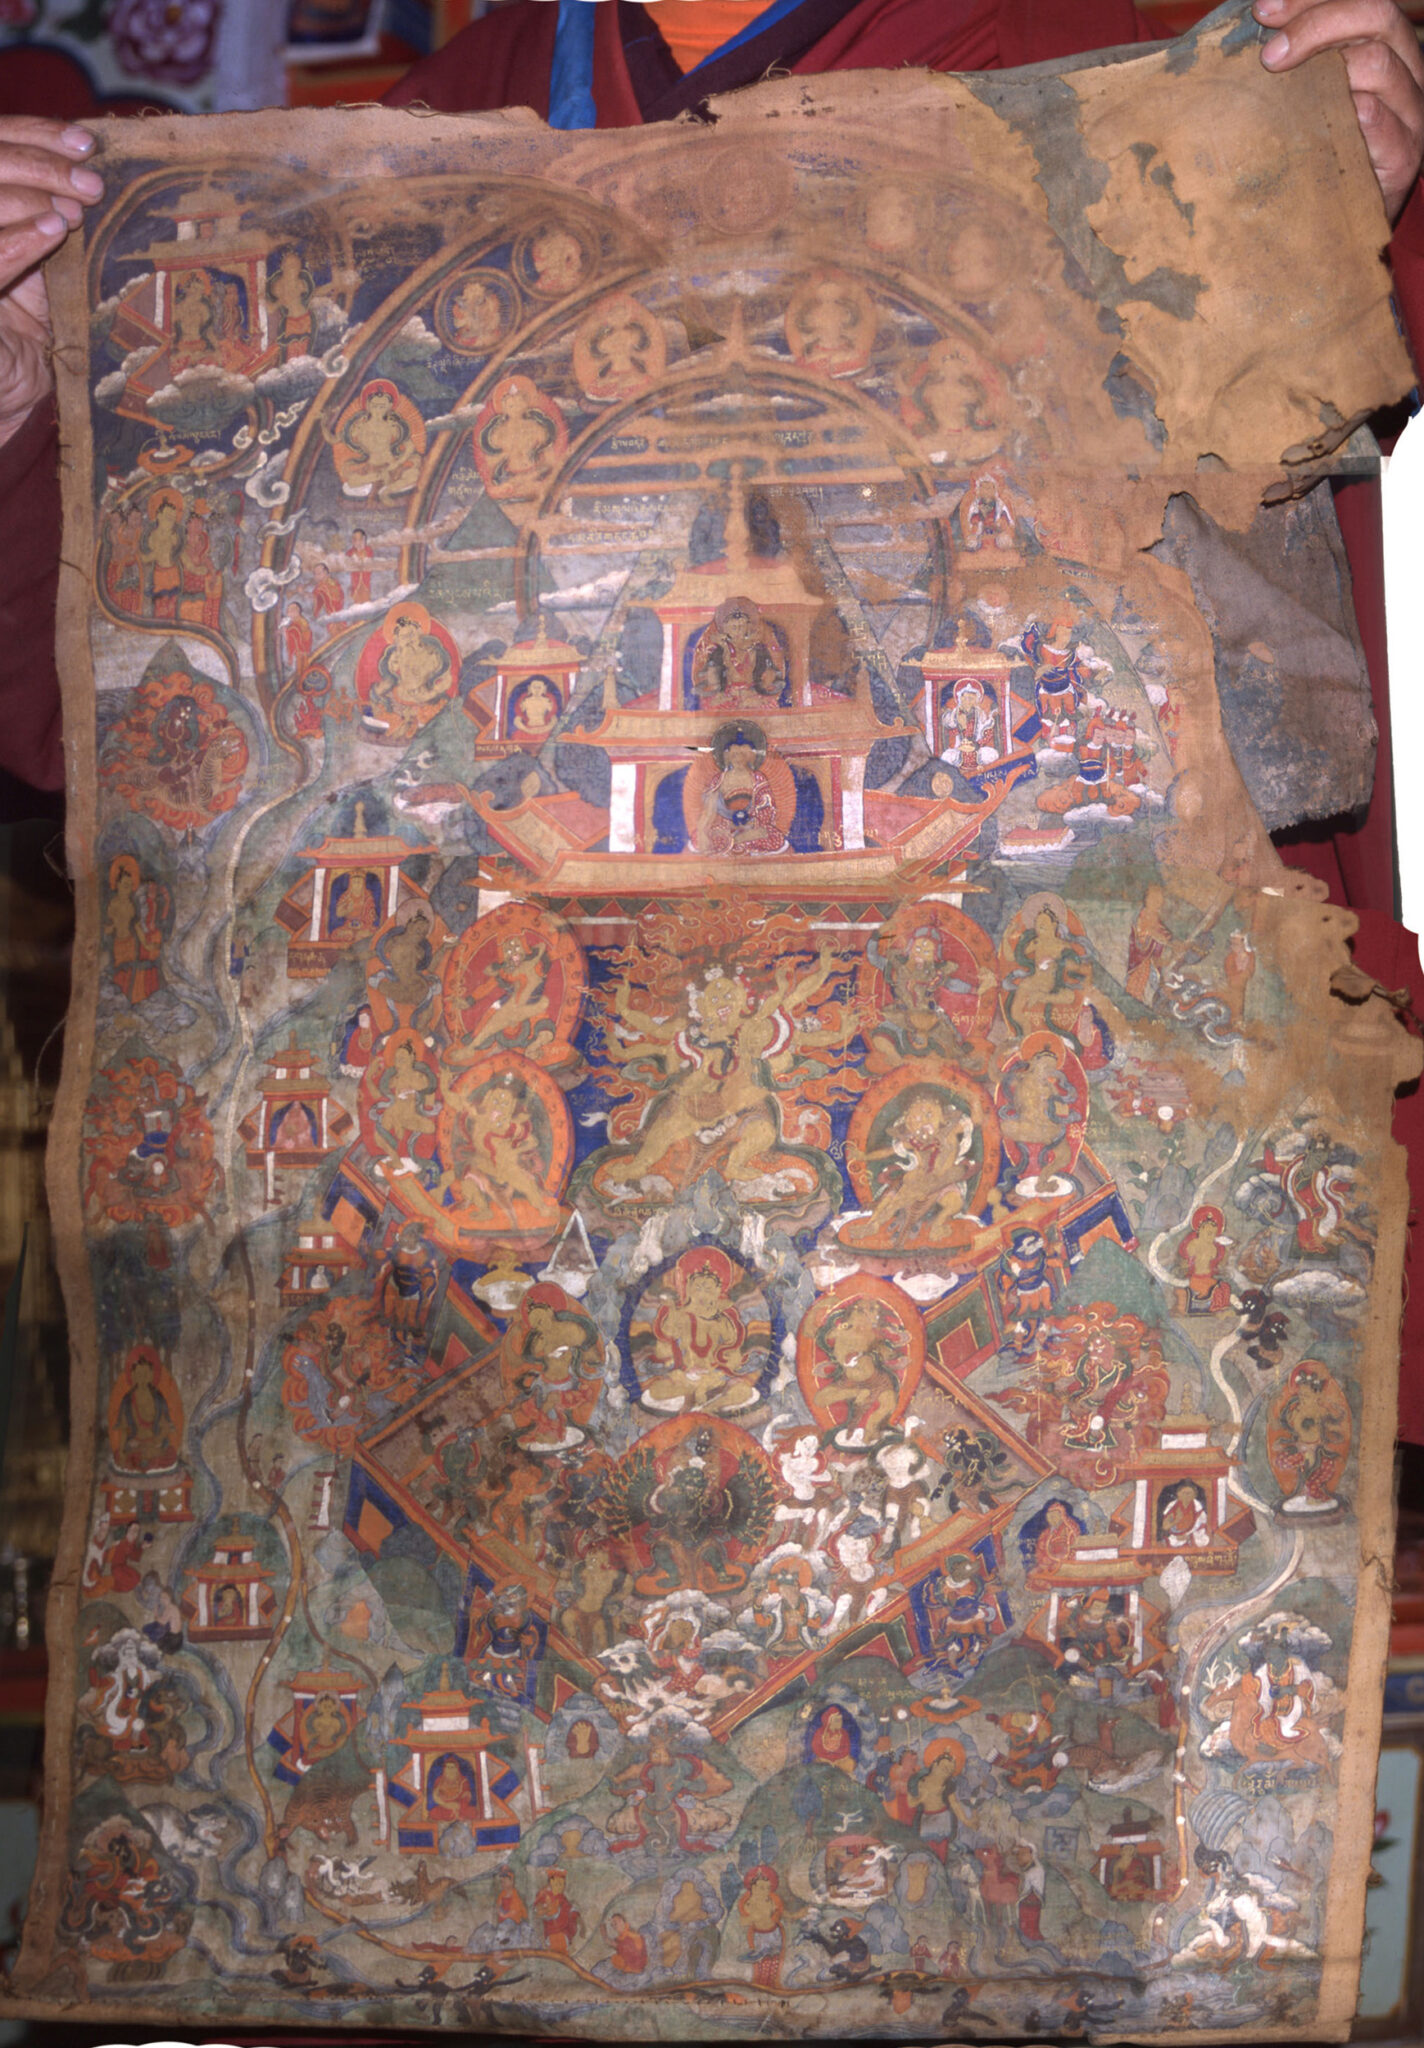 Tattered painting on textile depicting extravagant architectural structure covered in deity portraits amidst green landscape